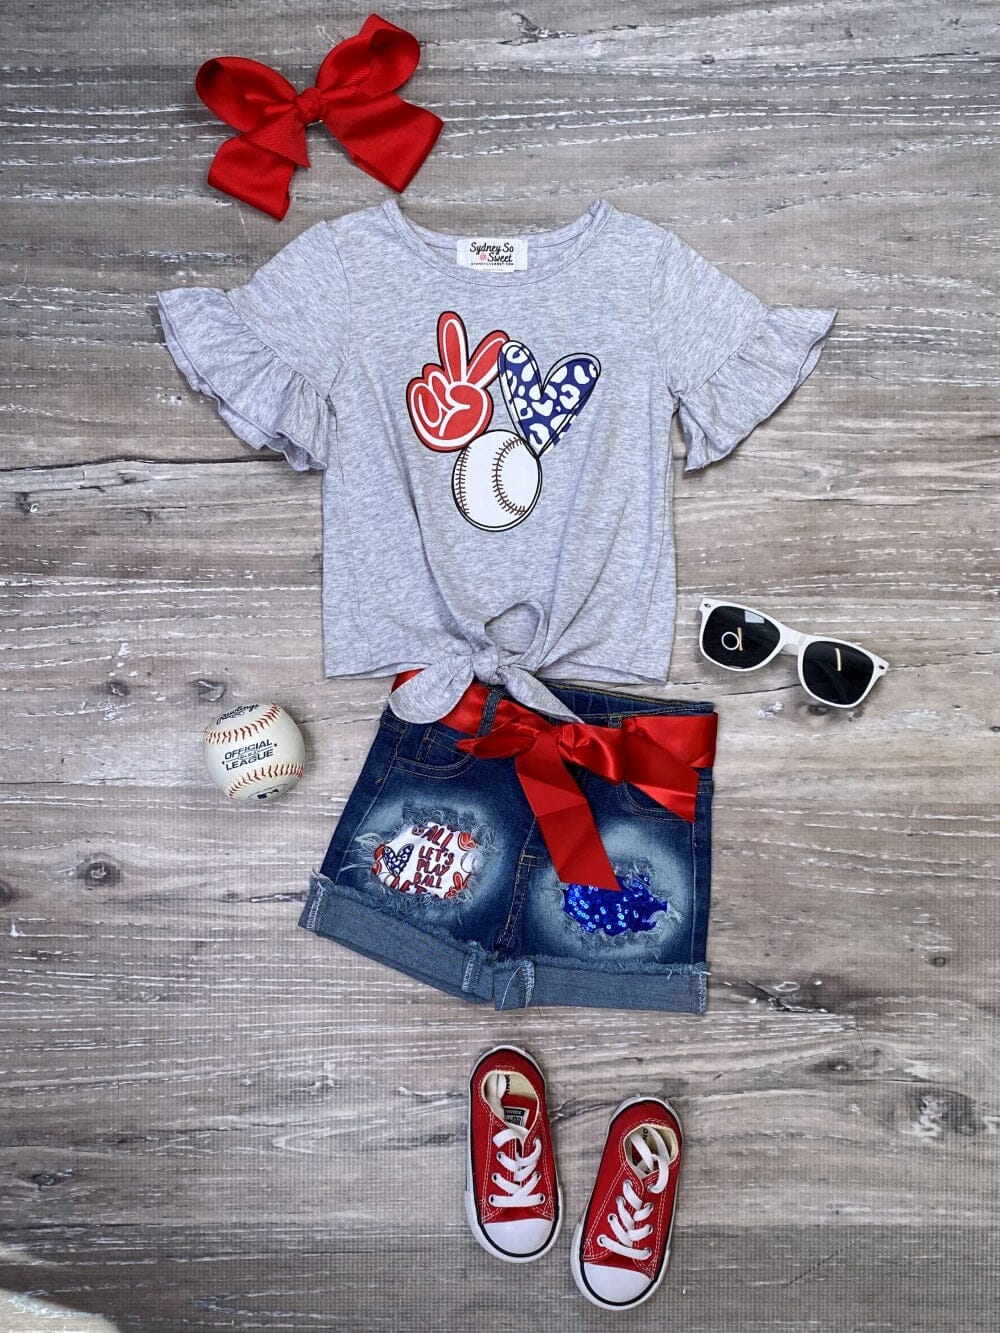 Love Of The Game Baseball Red & Blue Denim Girls Shorts Outfit - Sydney So Sweet